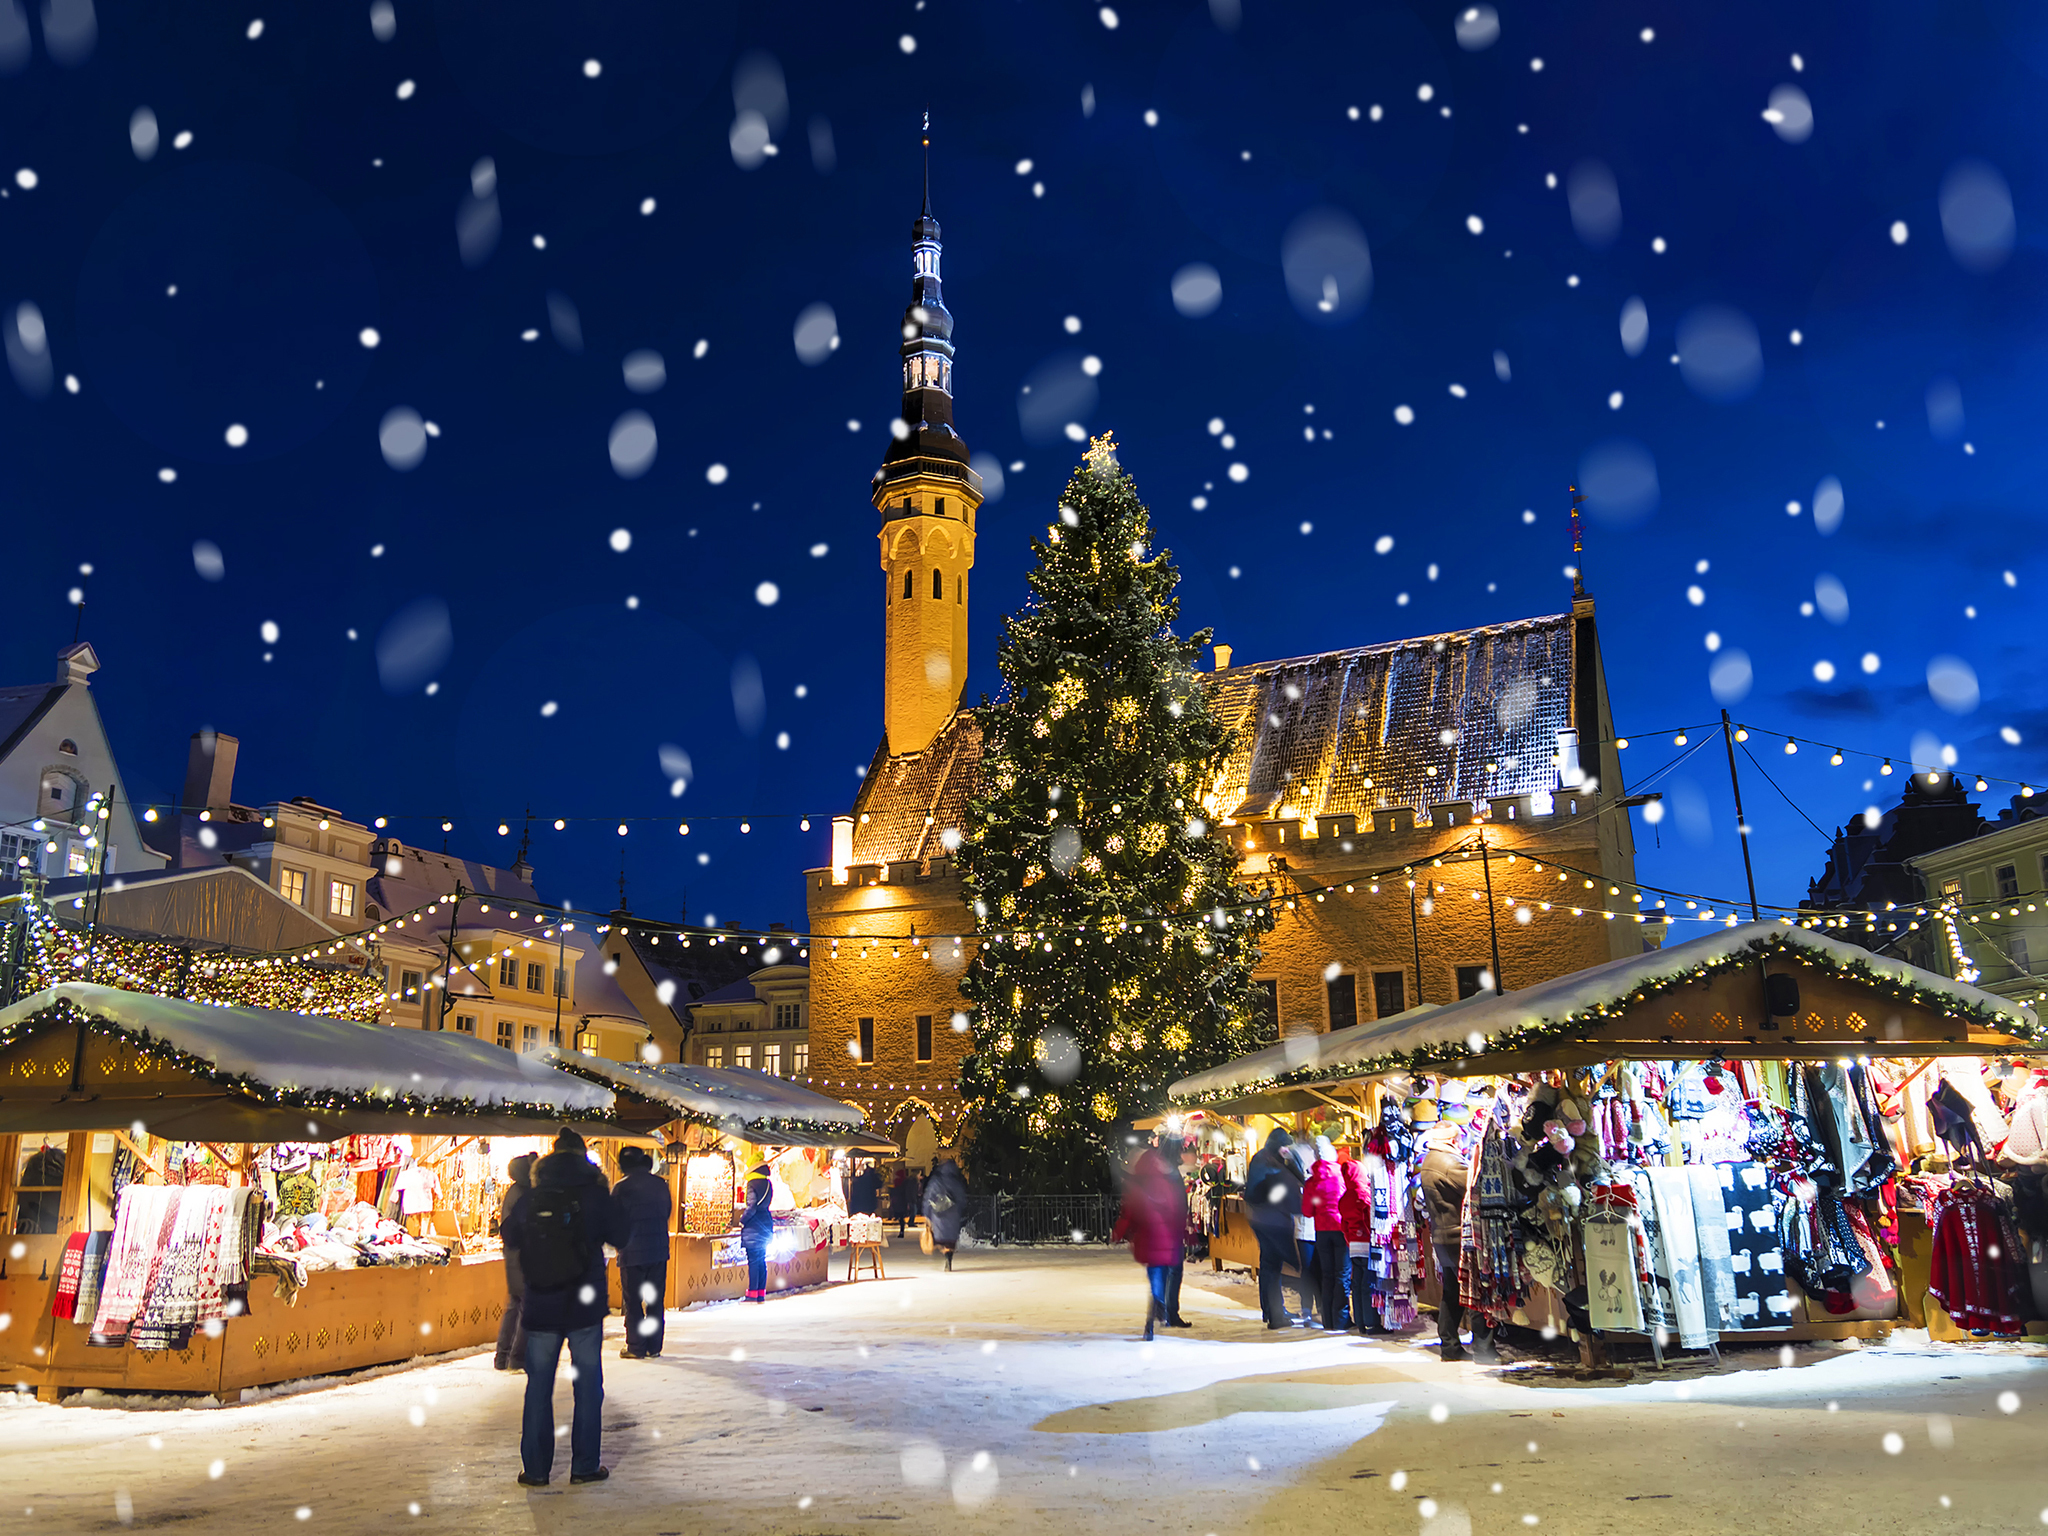 8 magical European Christmas markets to visit this winter